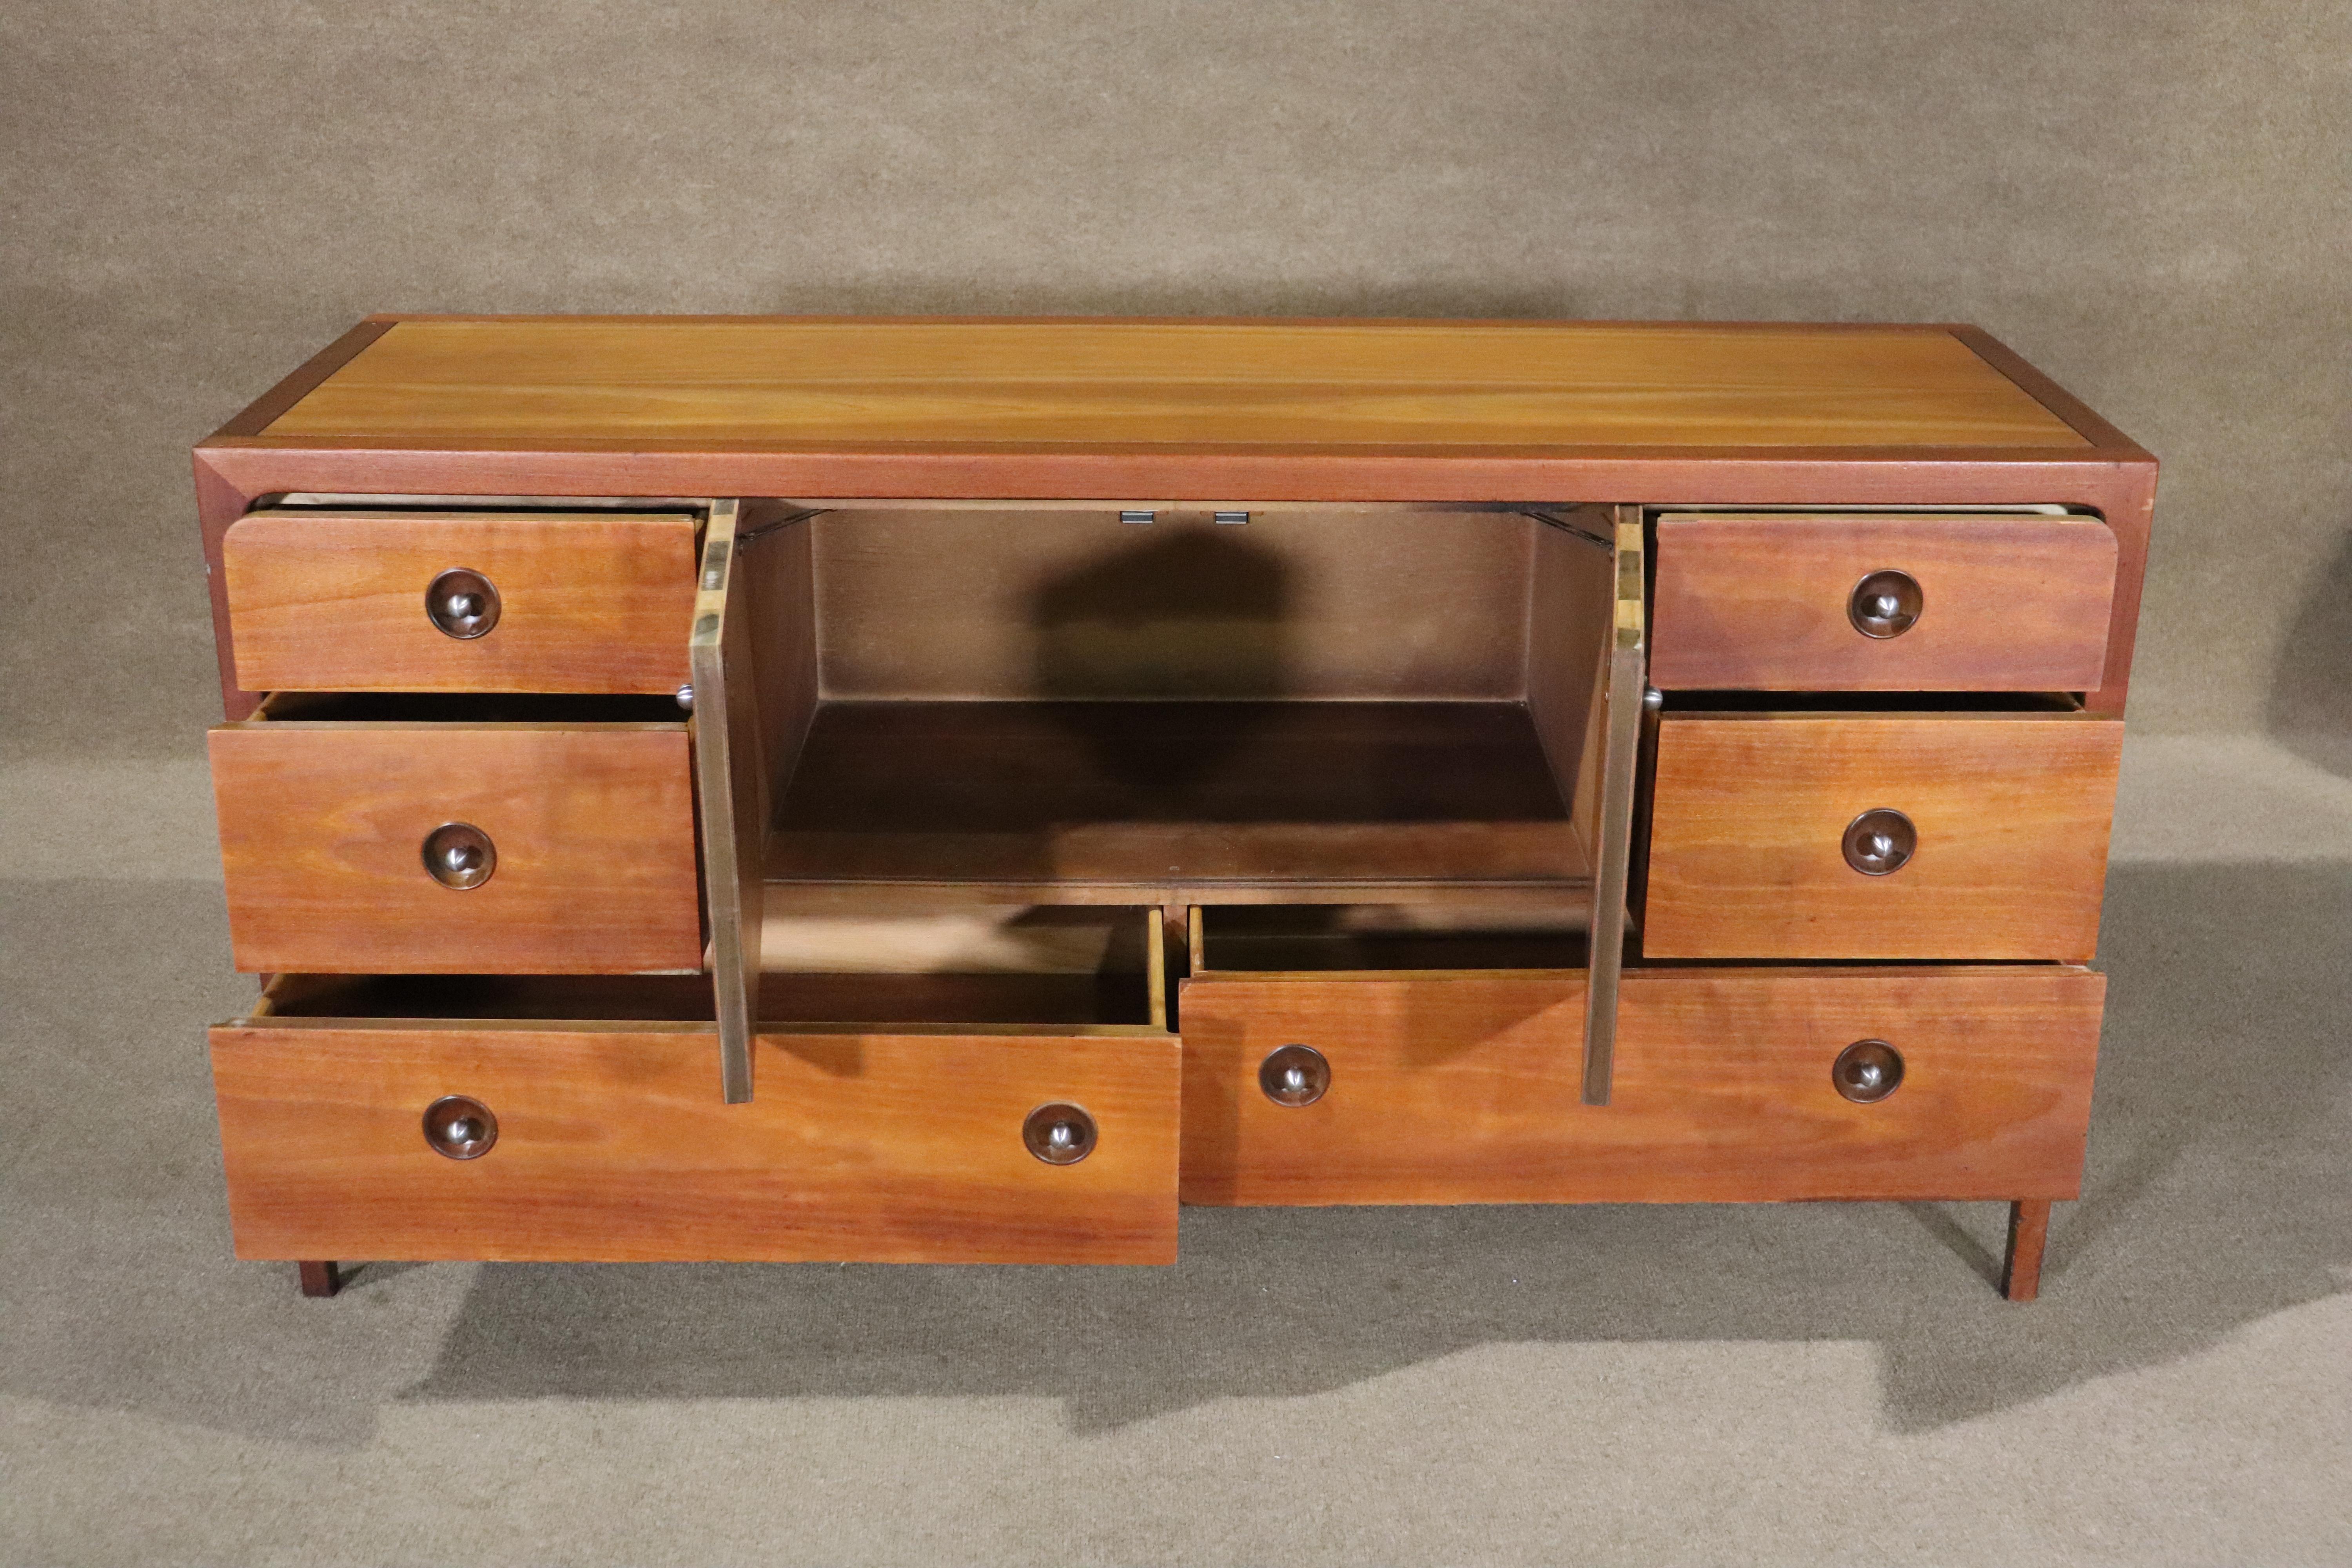 Great mid-century design by John Van Koert with luxurious mahogany, blended with wild-grained cherry wood. Inset hardware, rounded lines and tapered legs. Six drawers and center cabinet storage.
Please confirm location NY or NJ